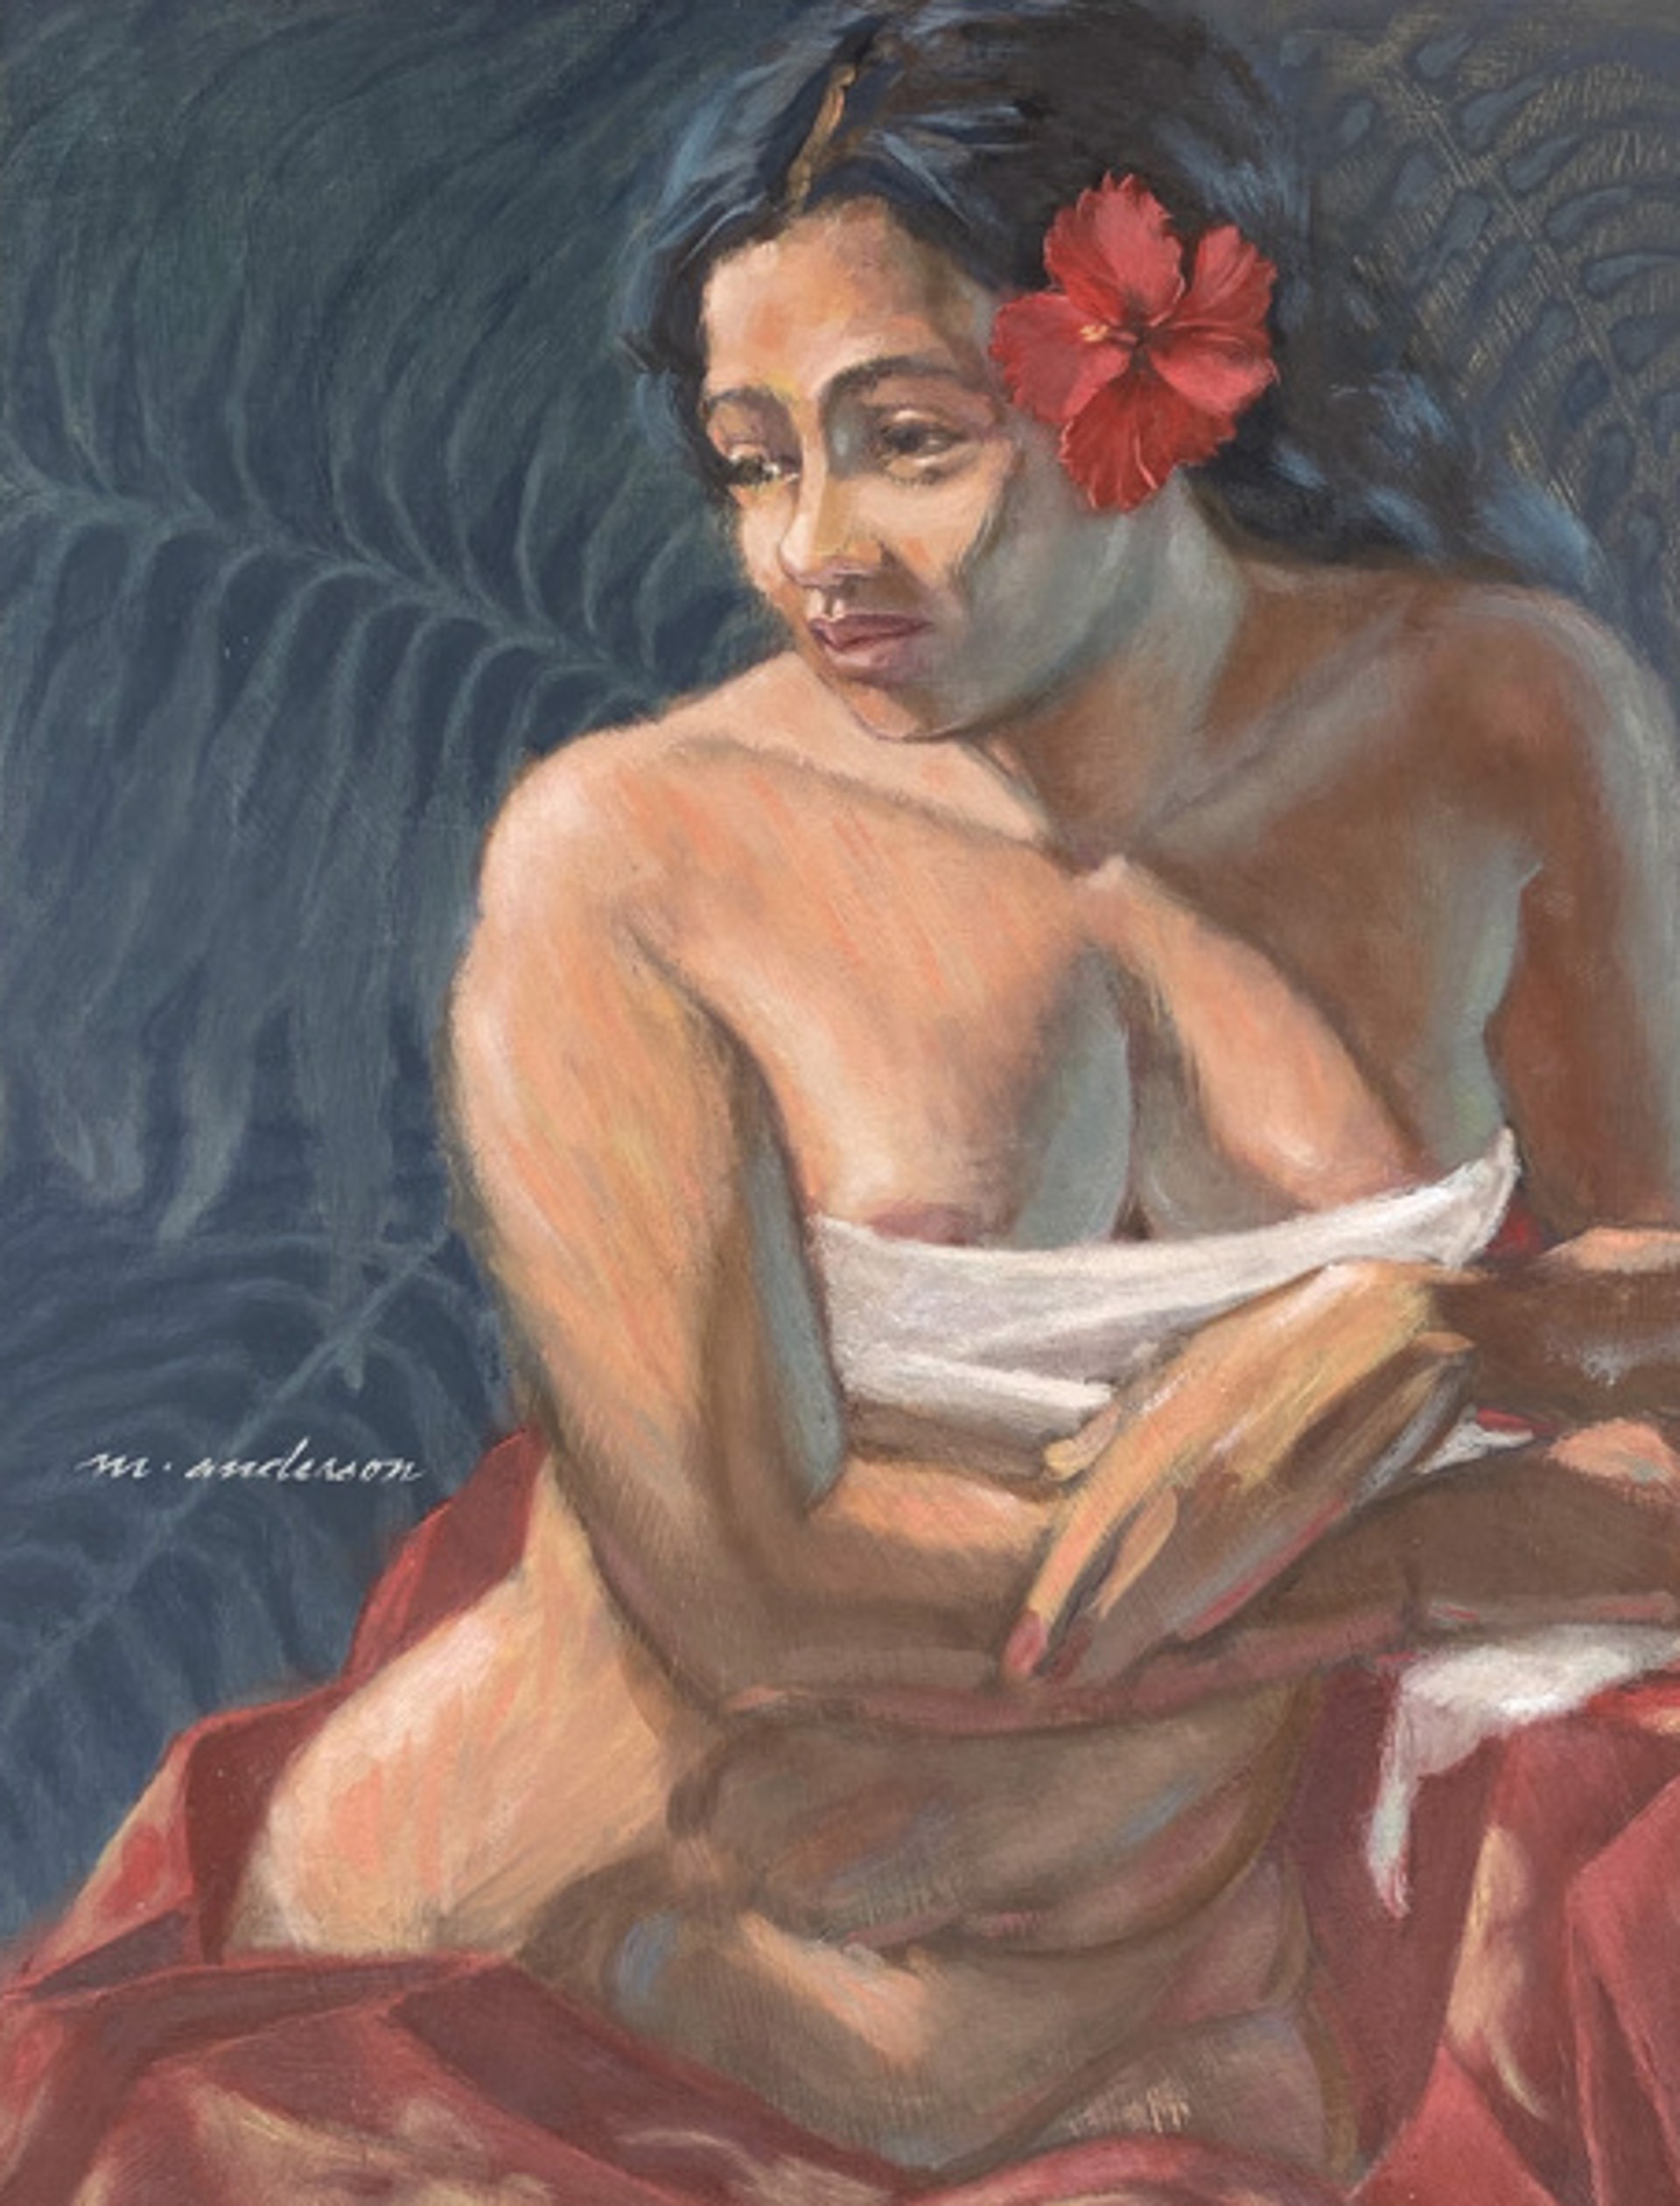 Lady with Hibiscus by Michael Anderson